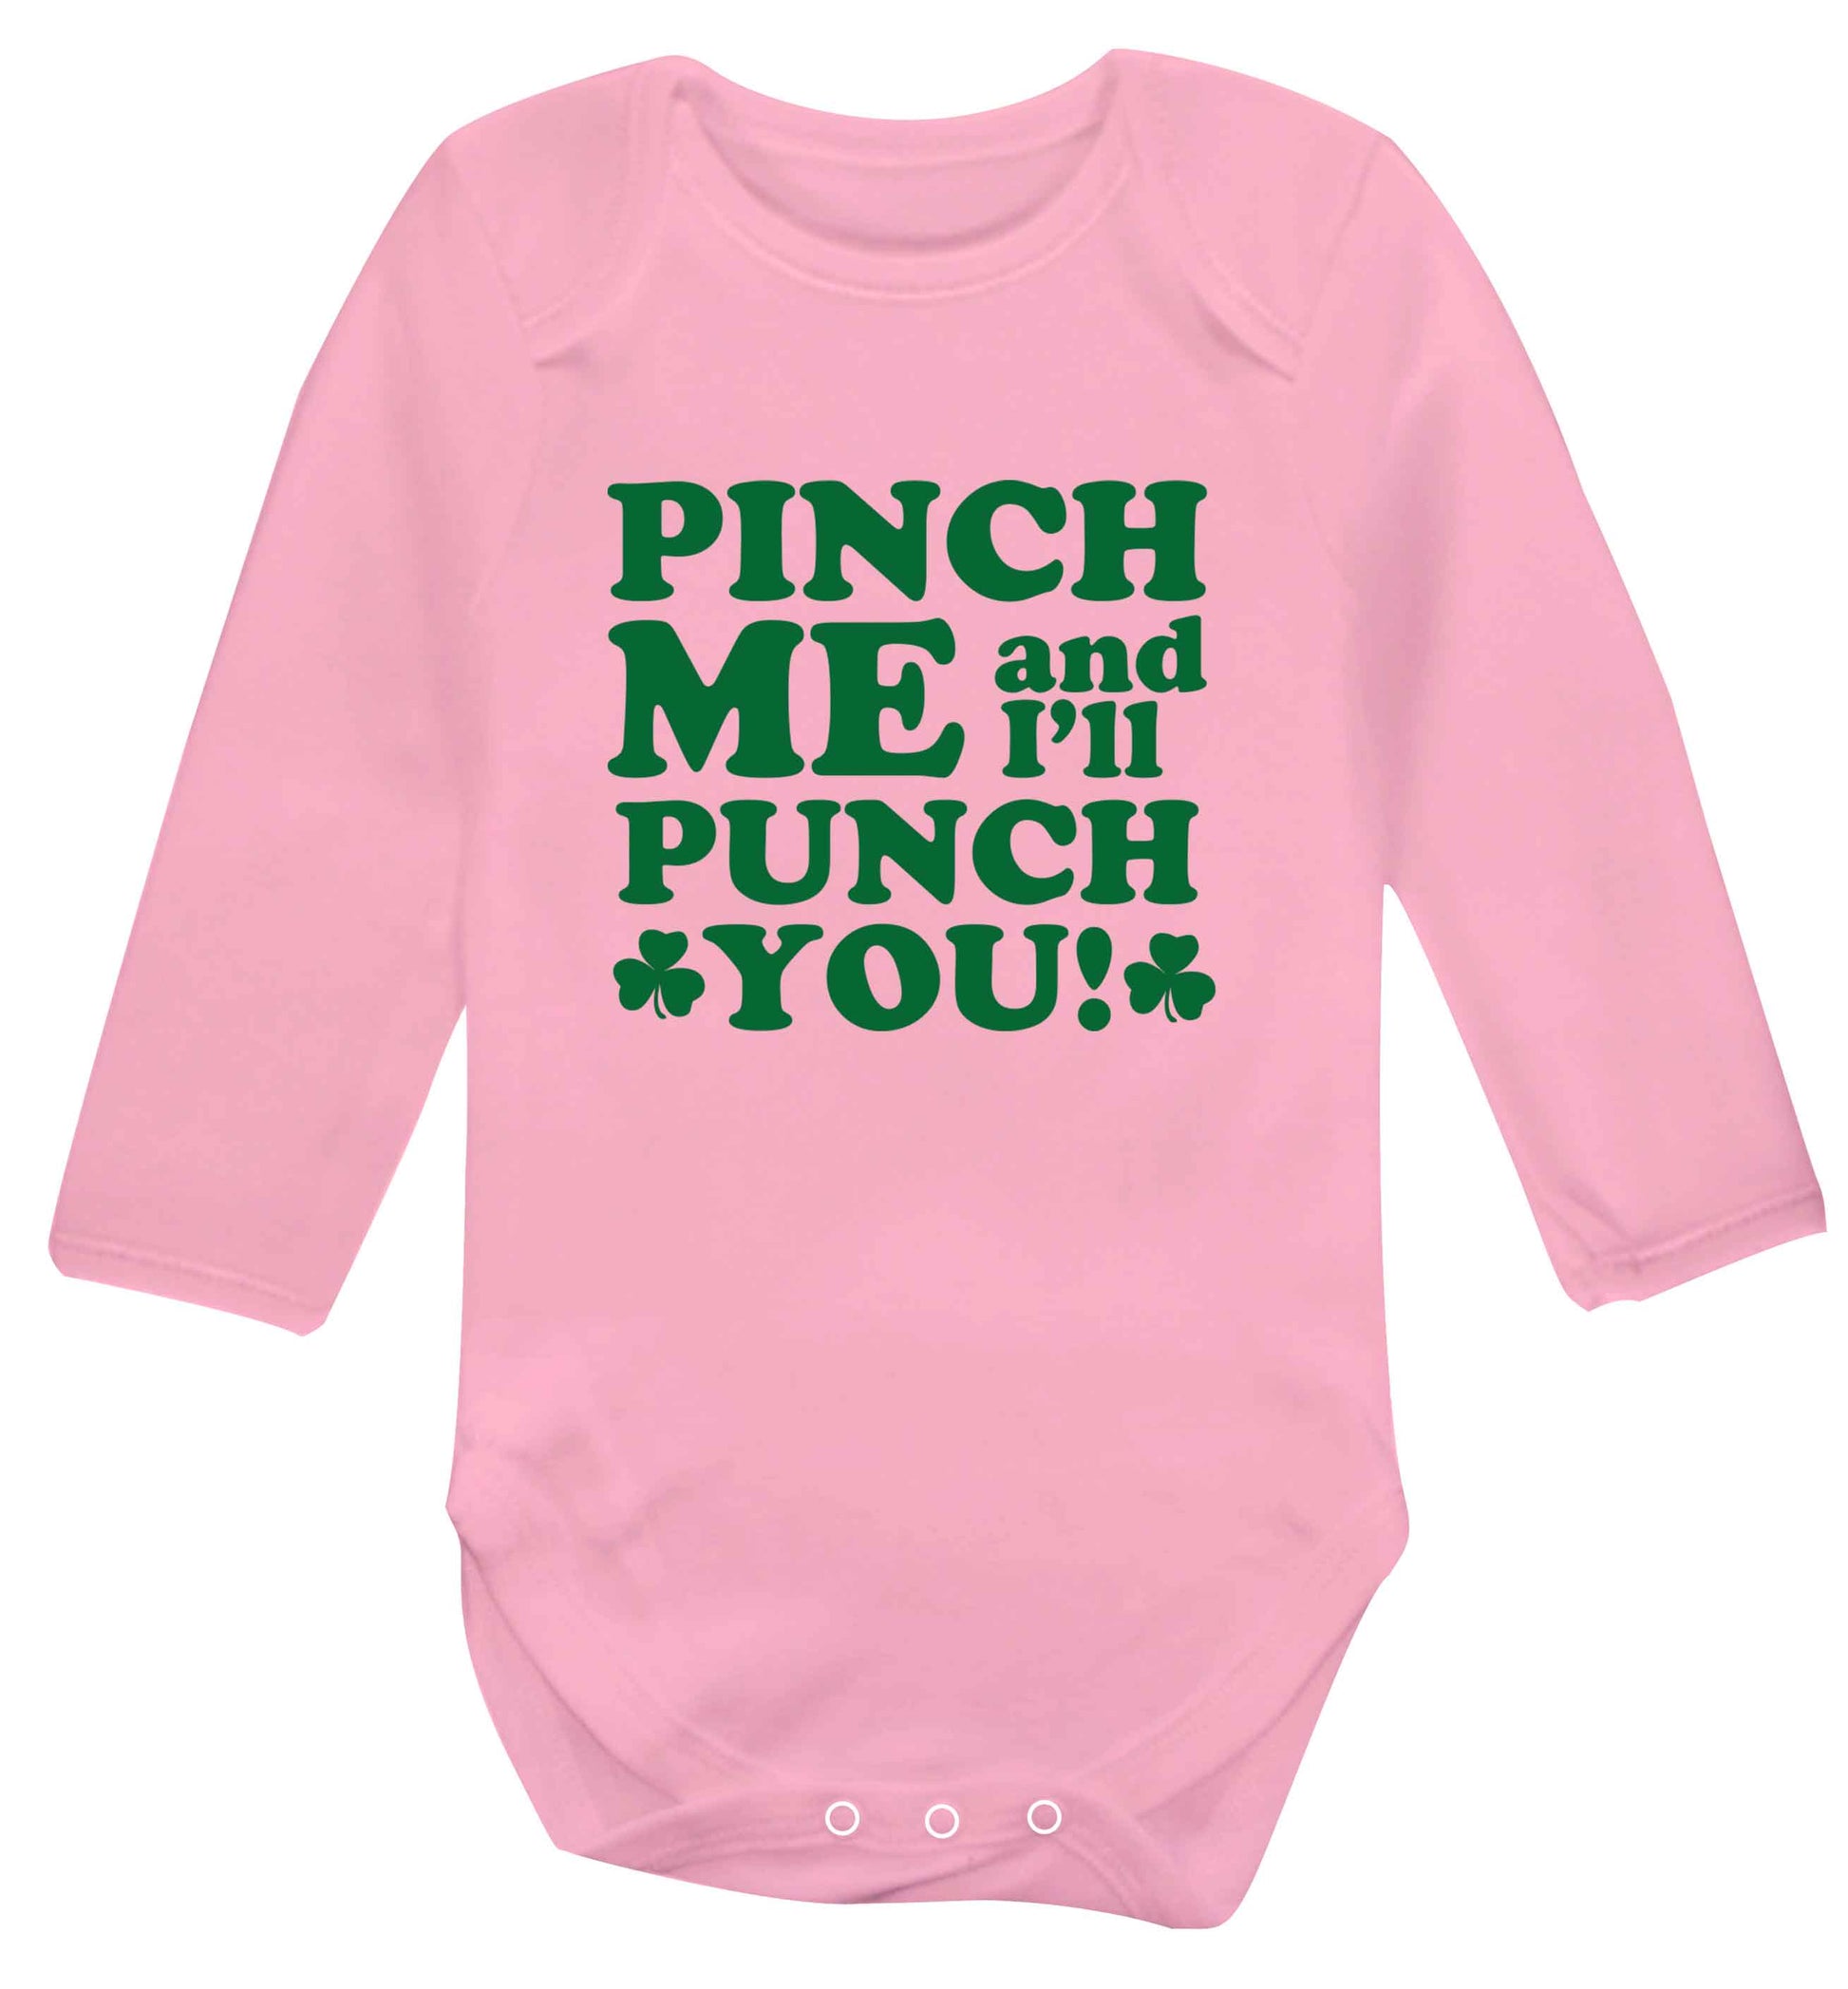 Pinch me and I'll punch you baby vest long sleeved pale pink 6-12 months